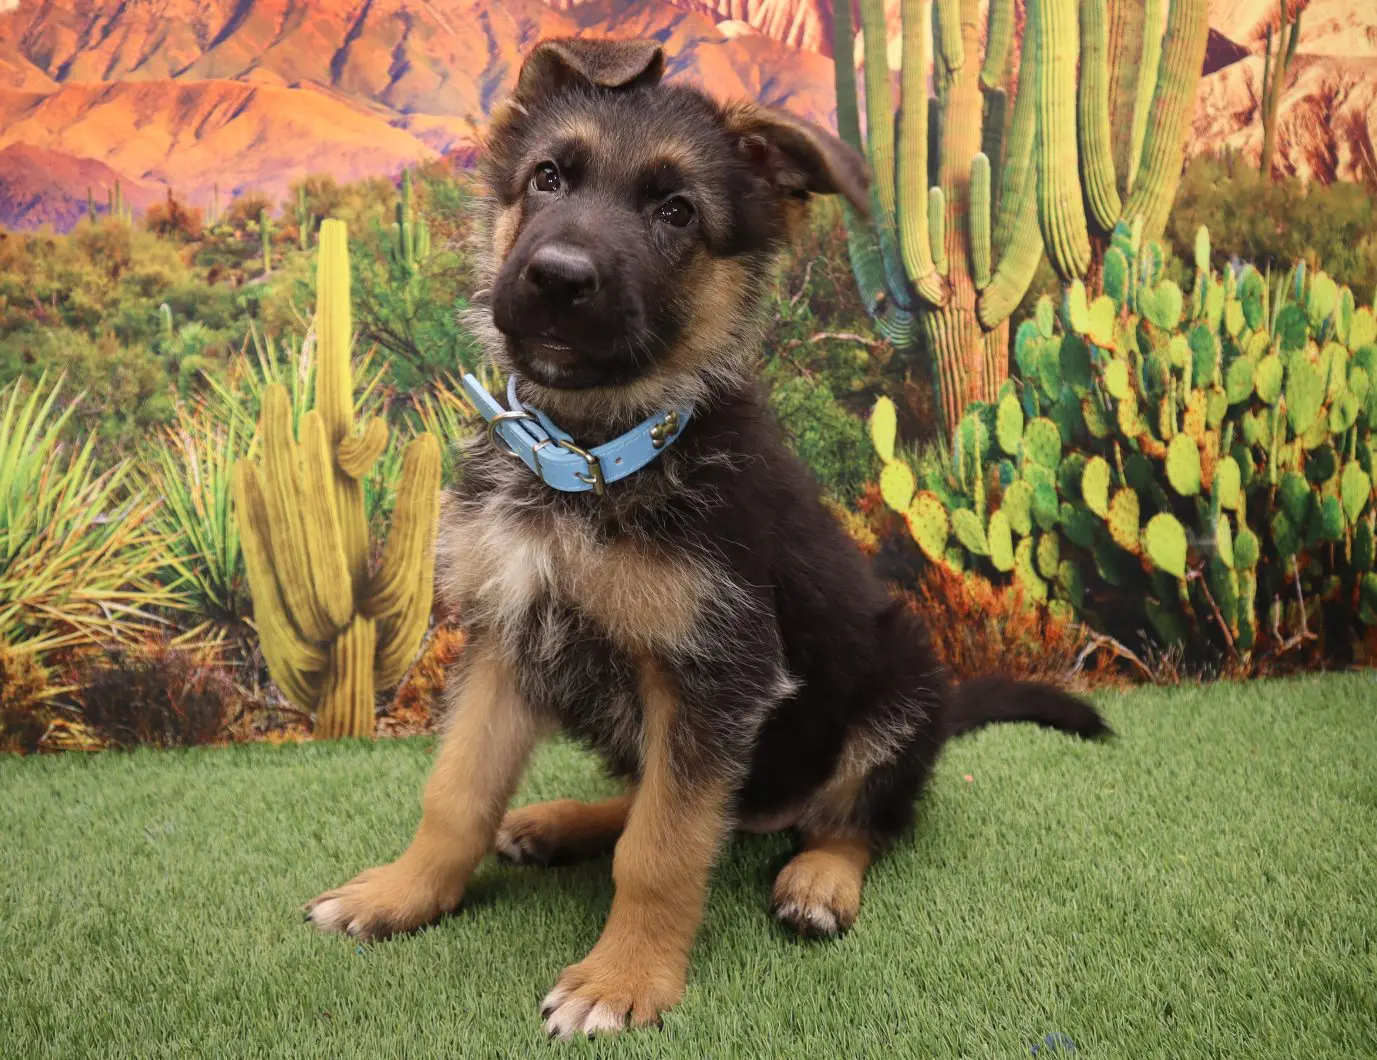 A puppy sitting on the grass in front of a cactus wall.